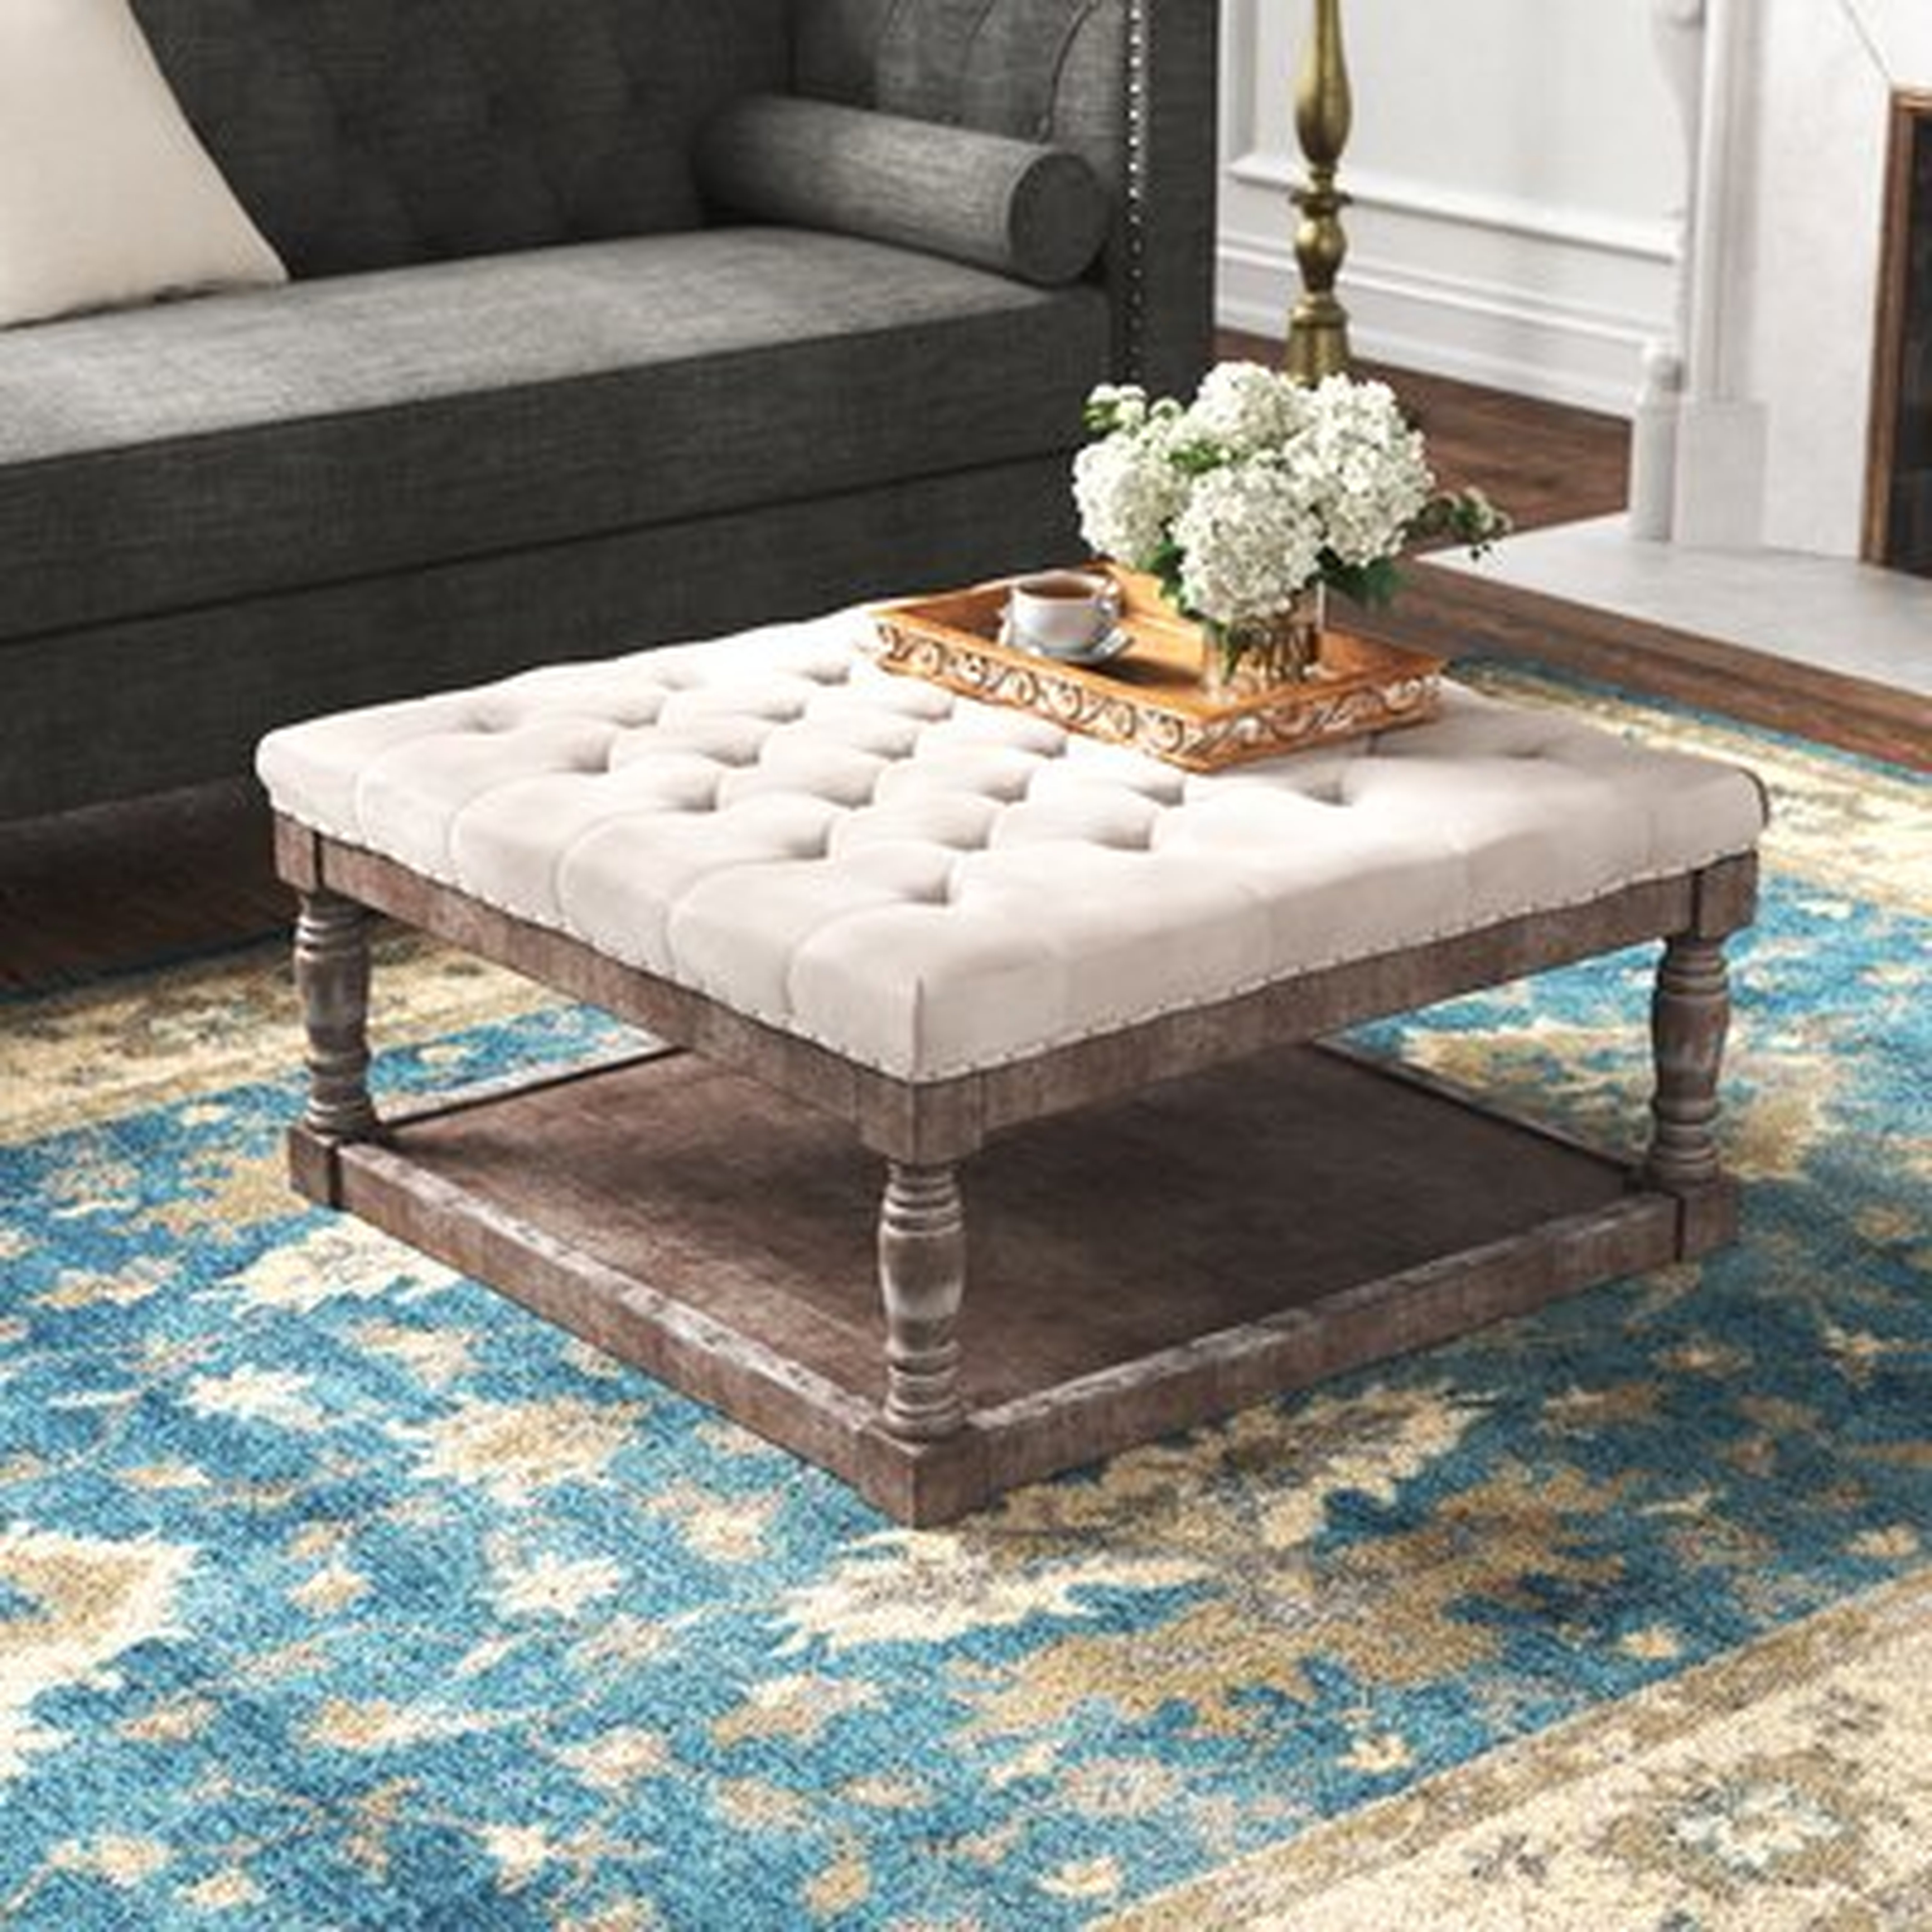 34" Wide Tufted Square Cocktail Ottoman - Wayfair